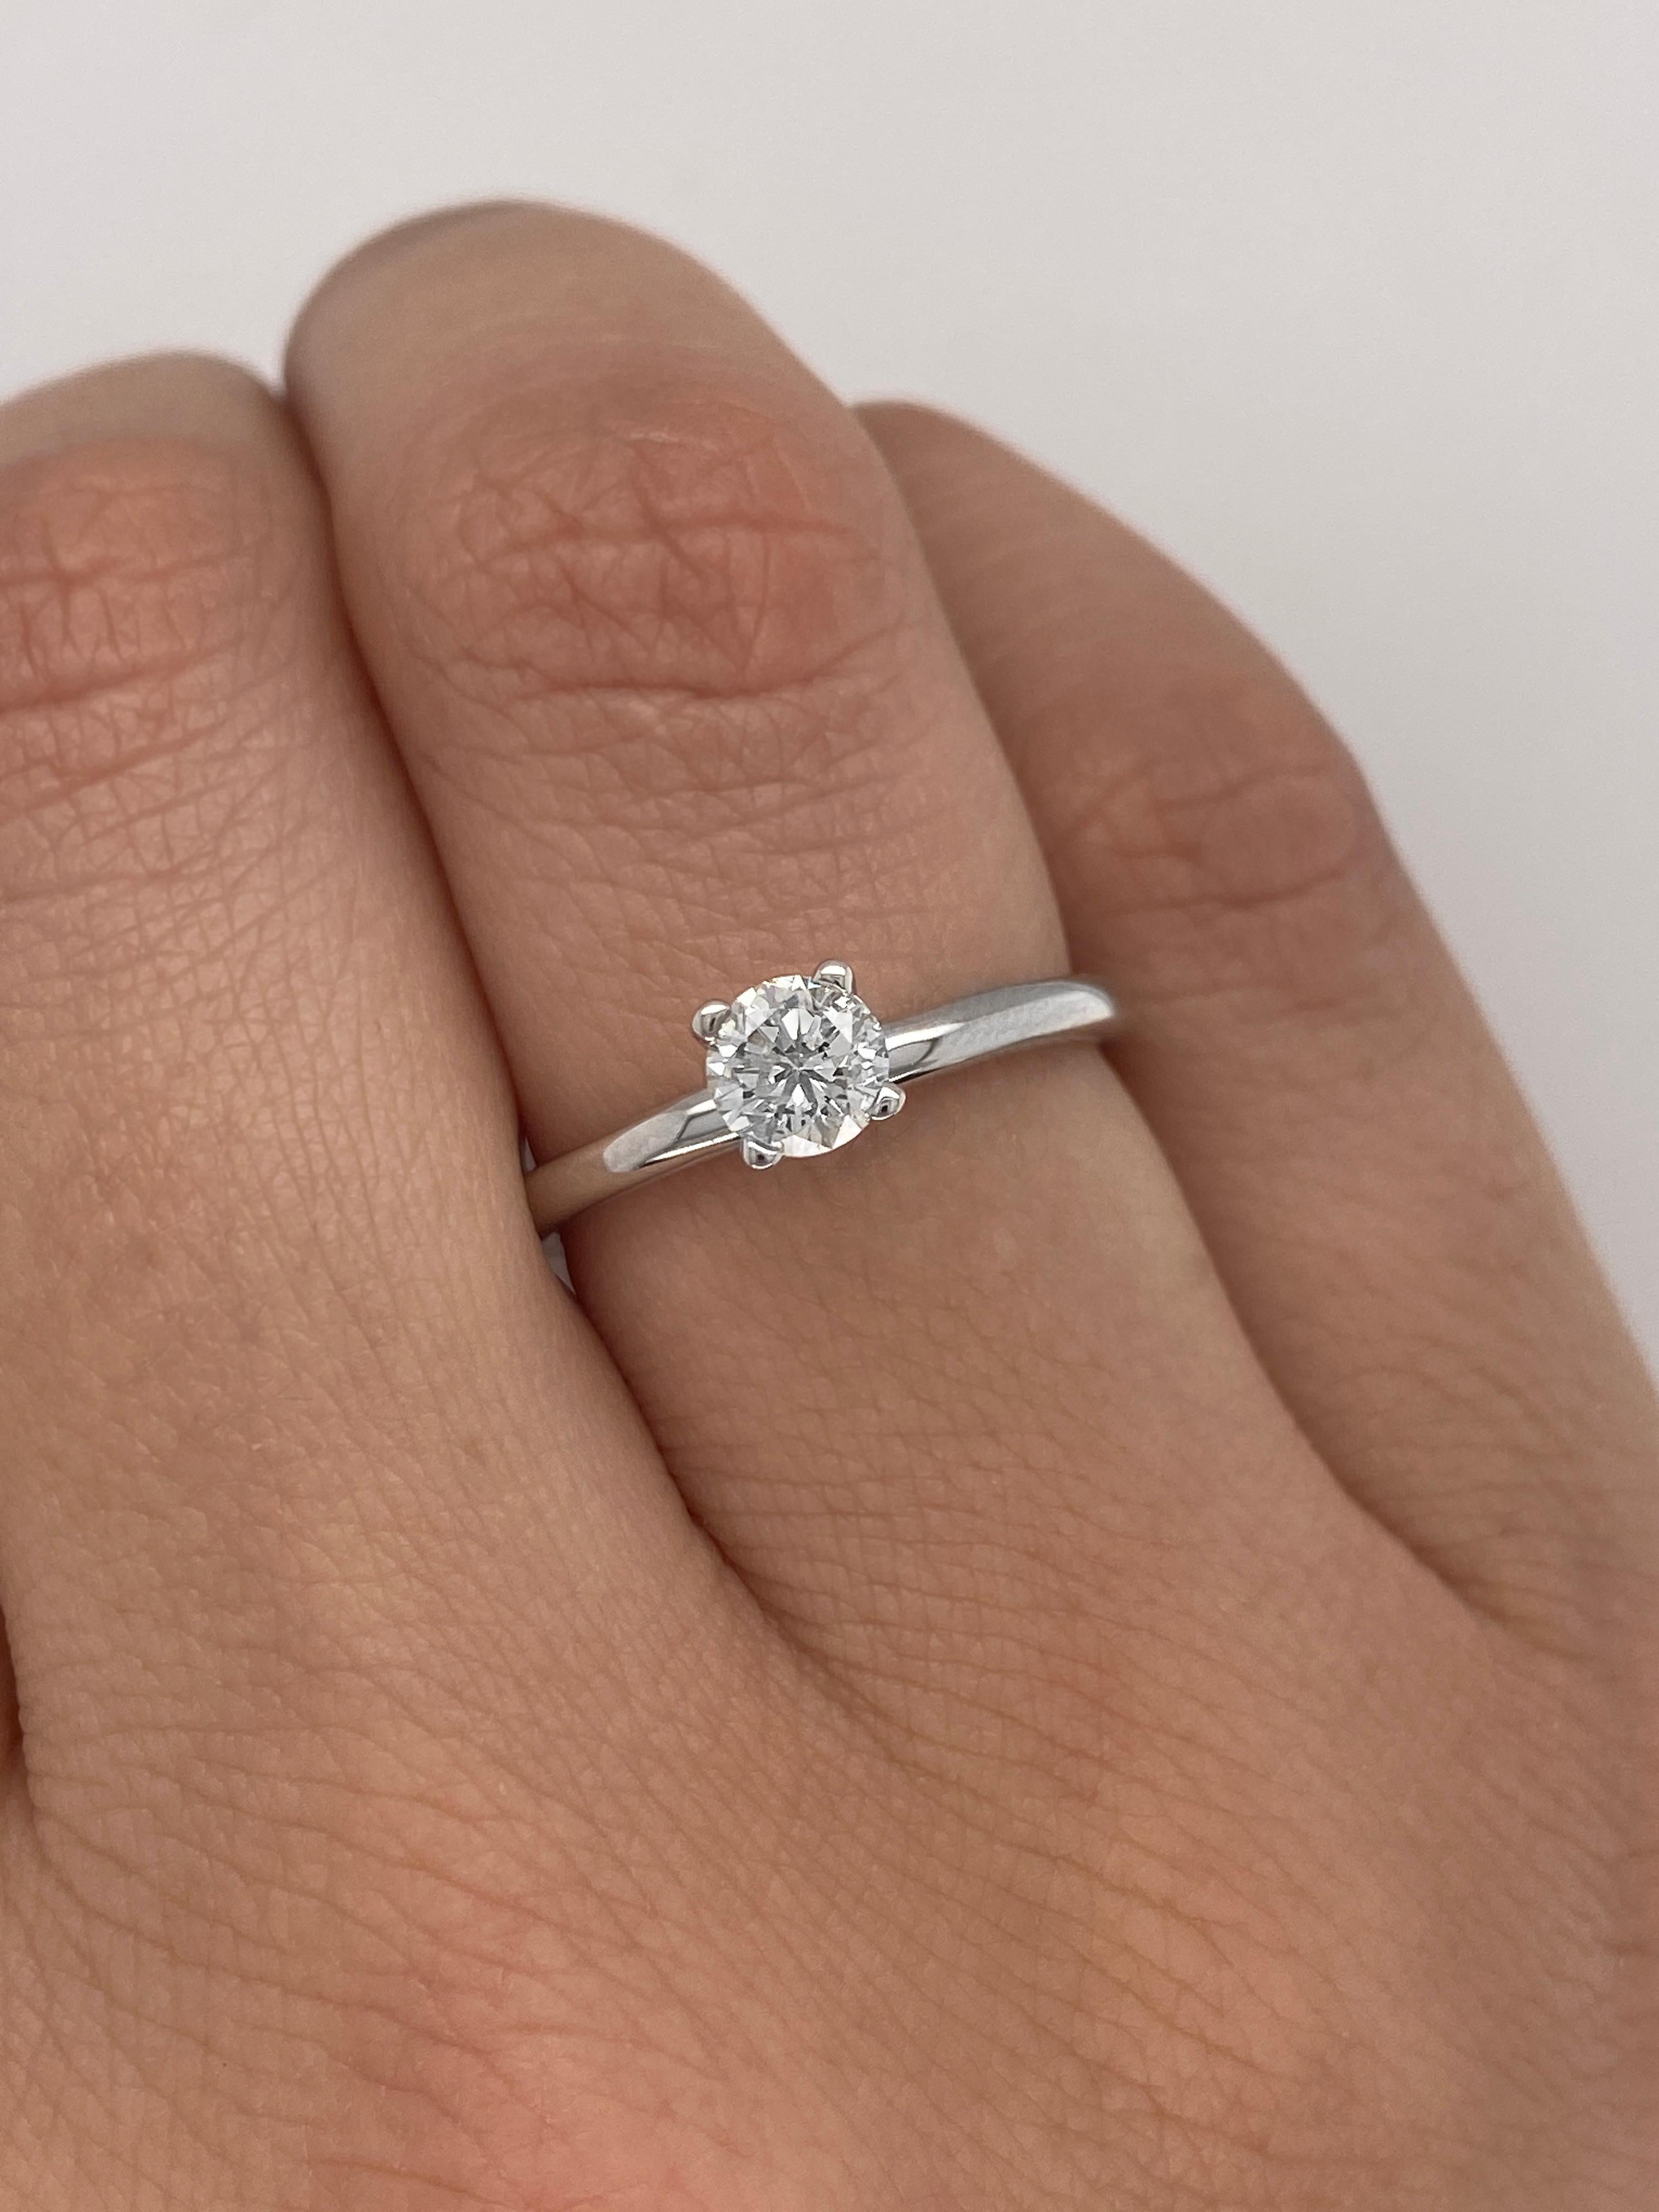 For Sale:  0.50 Ct Natural Round Cut Diamond Engagement Ring 14K White Gold 4